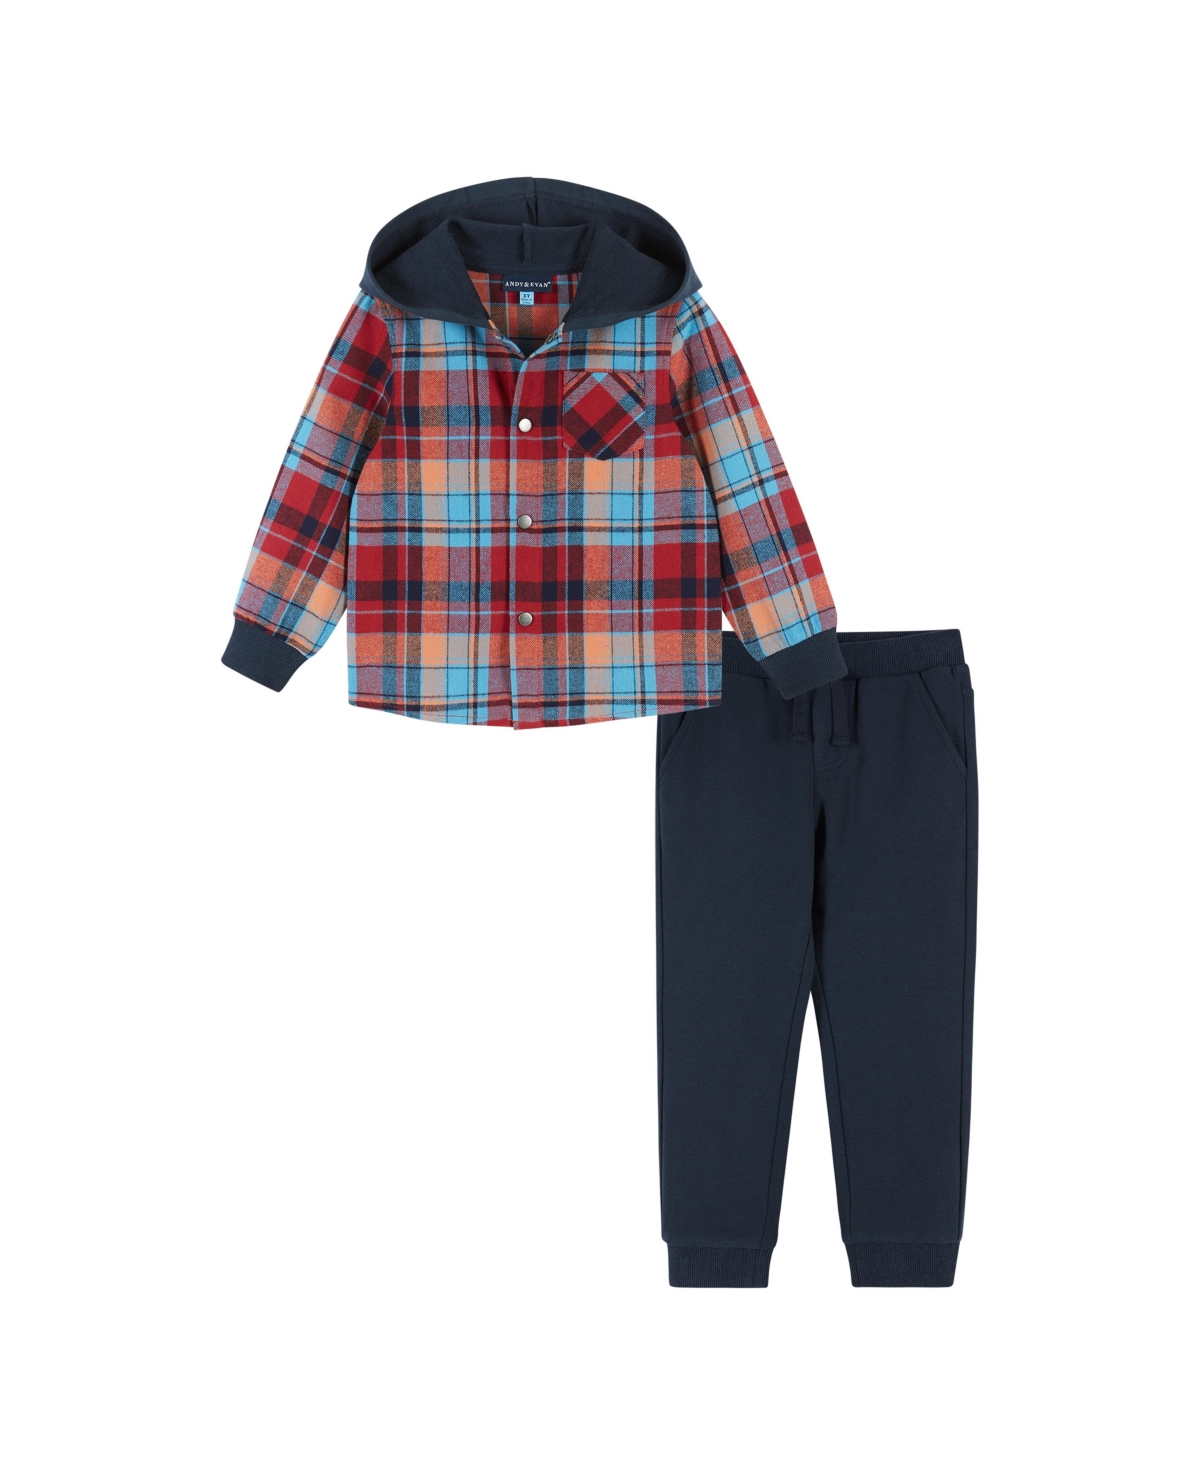 Andy & Evan Kids' Toddler/child Boys Navy & Red Plaid Hooded Flannel Set In Medium Red